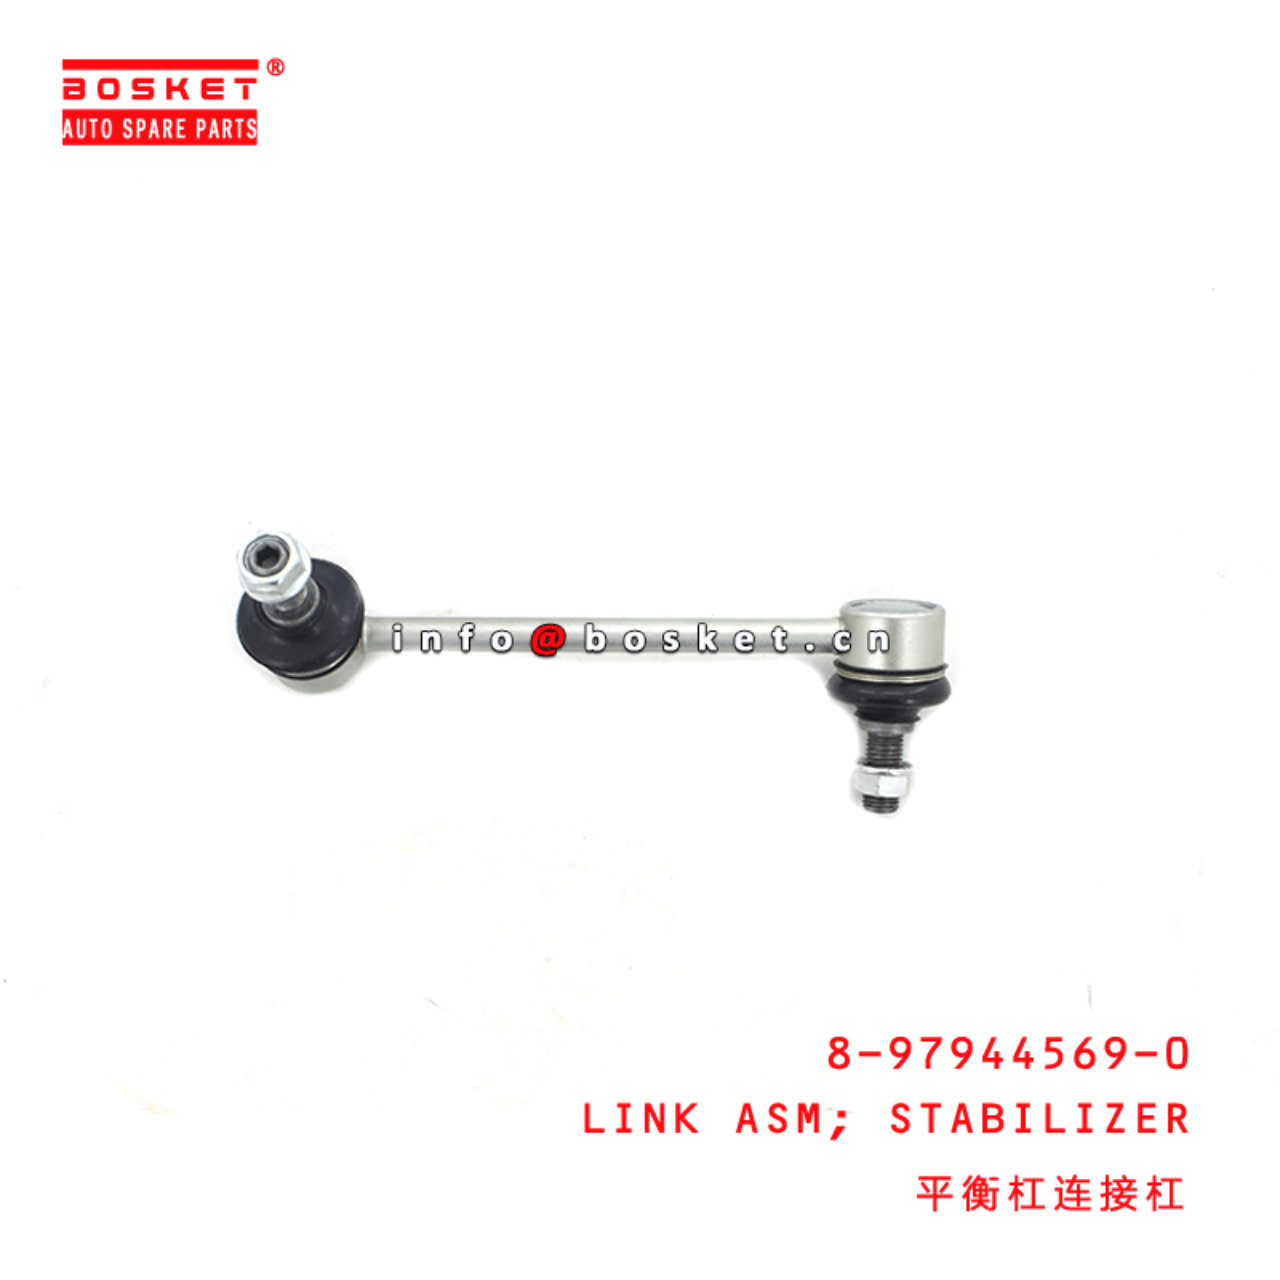 8-97944569-0 Stabilizer Link Assembly 8979445690 Suitable for ISUZU D-MAX 4X4